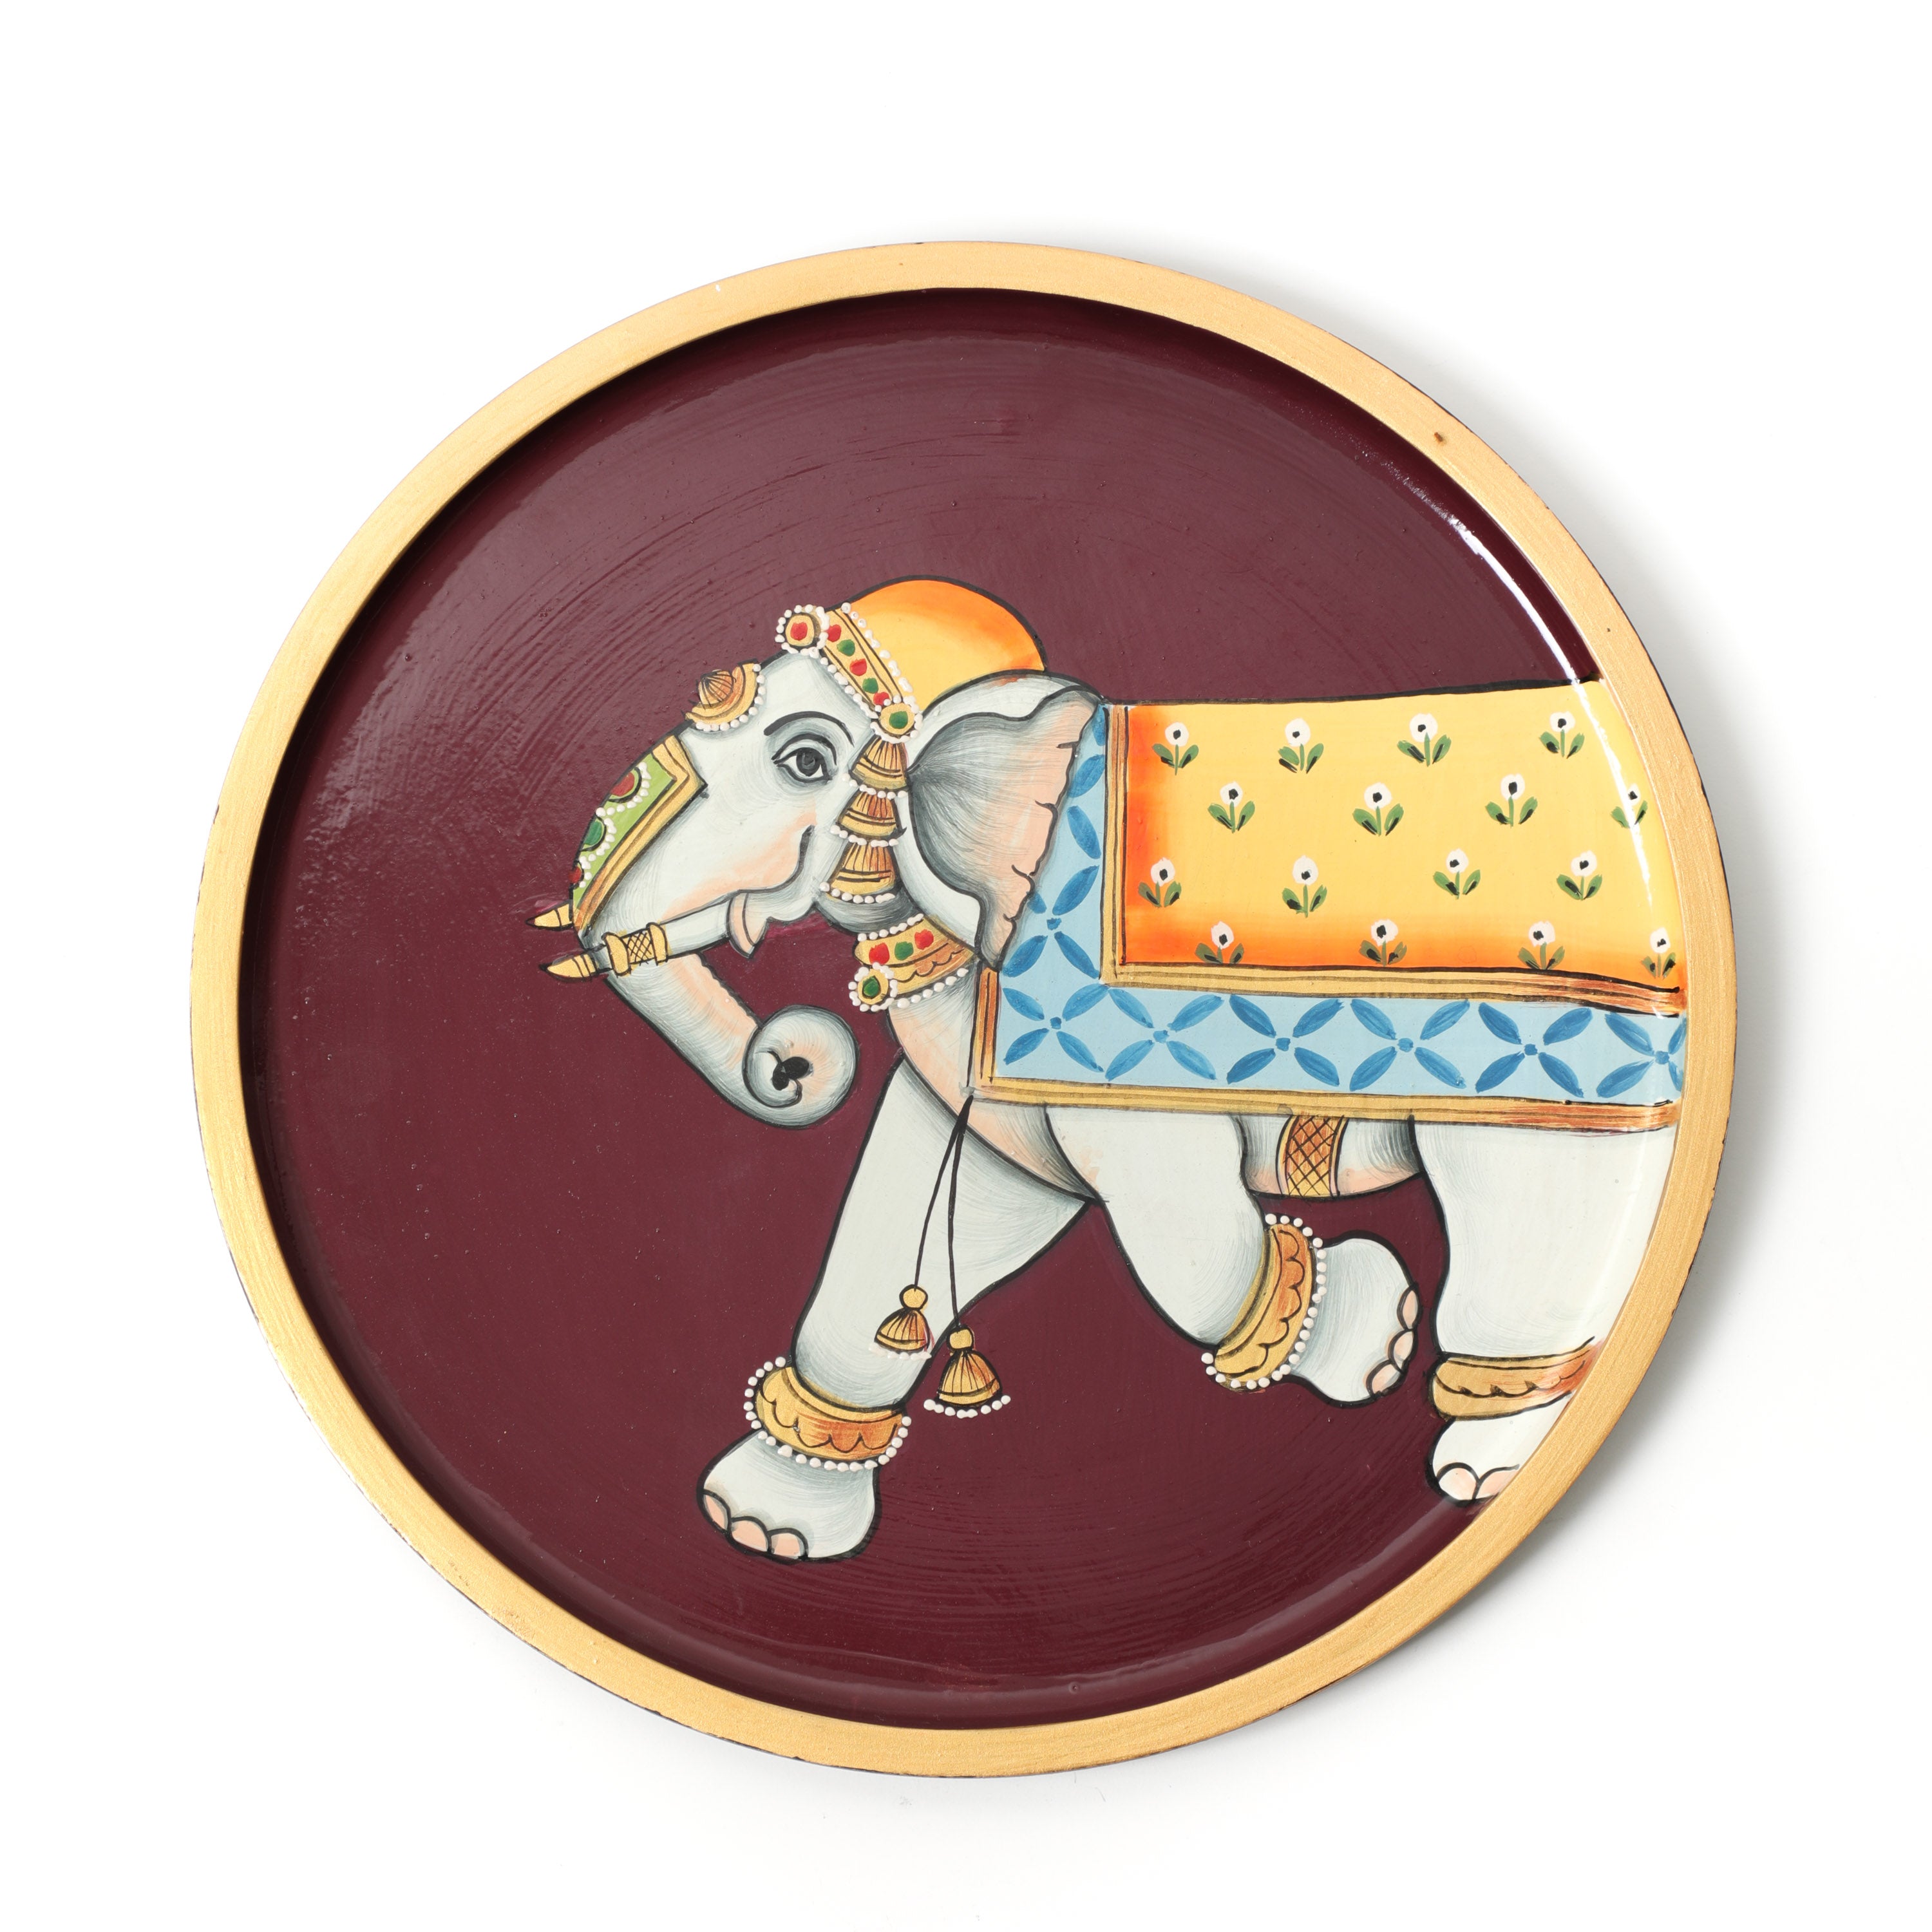 Crafted with the finishing touch of enamel, this wall plate decor will add to the character and personality of your home.